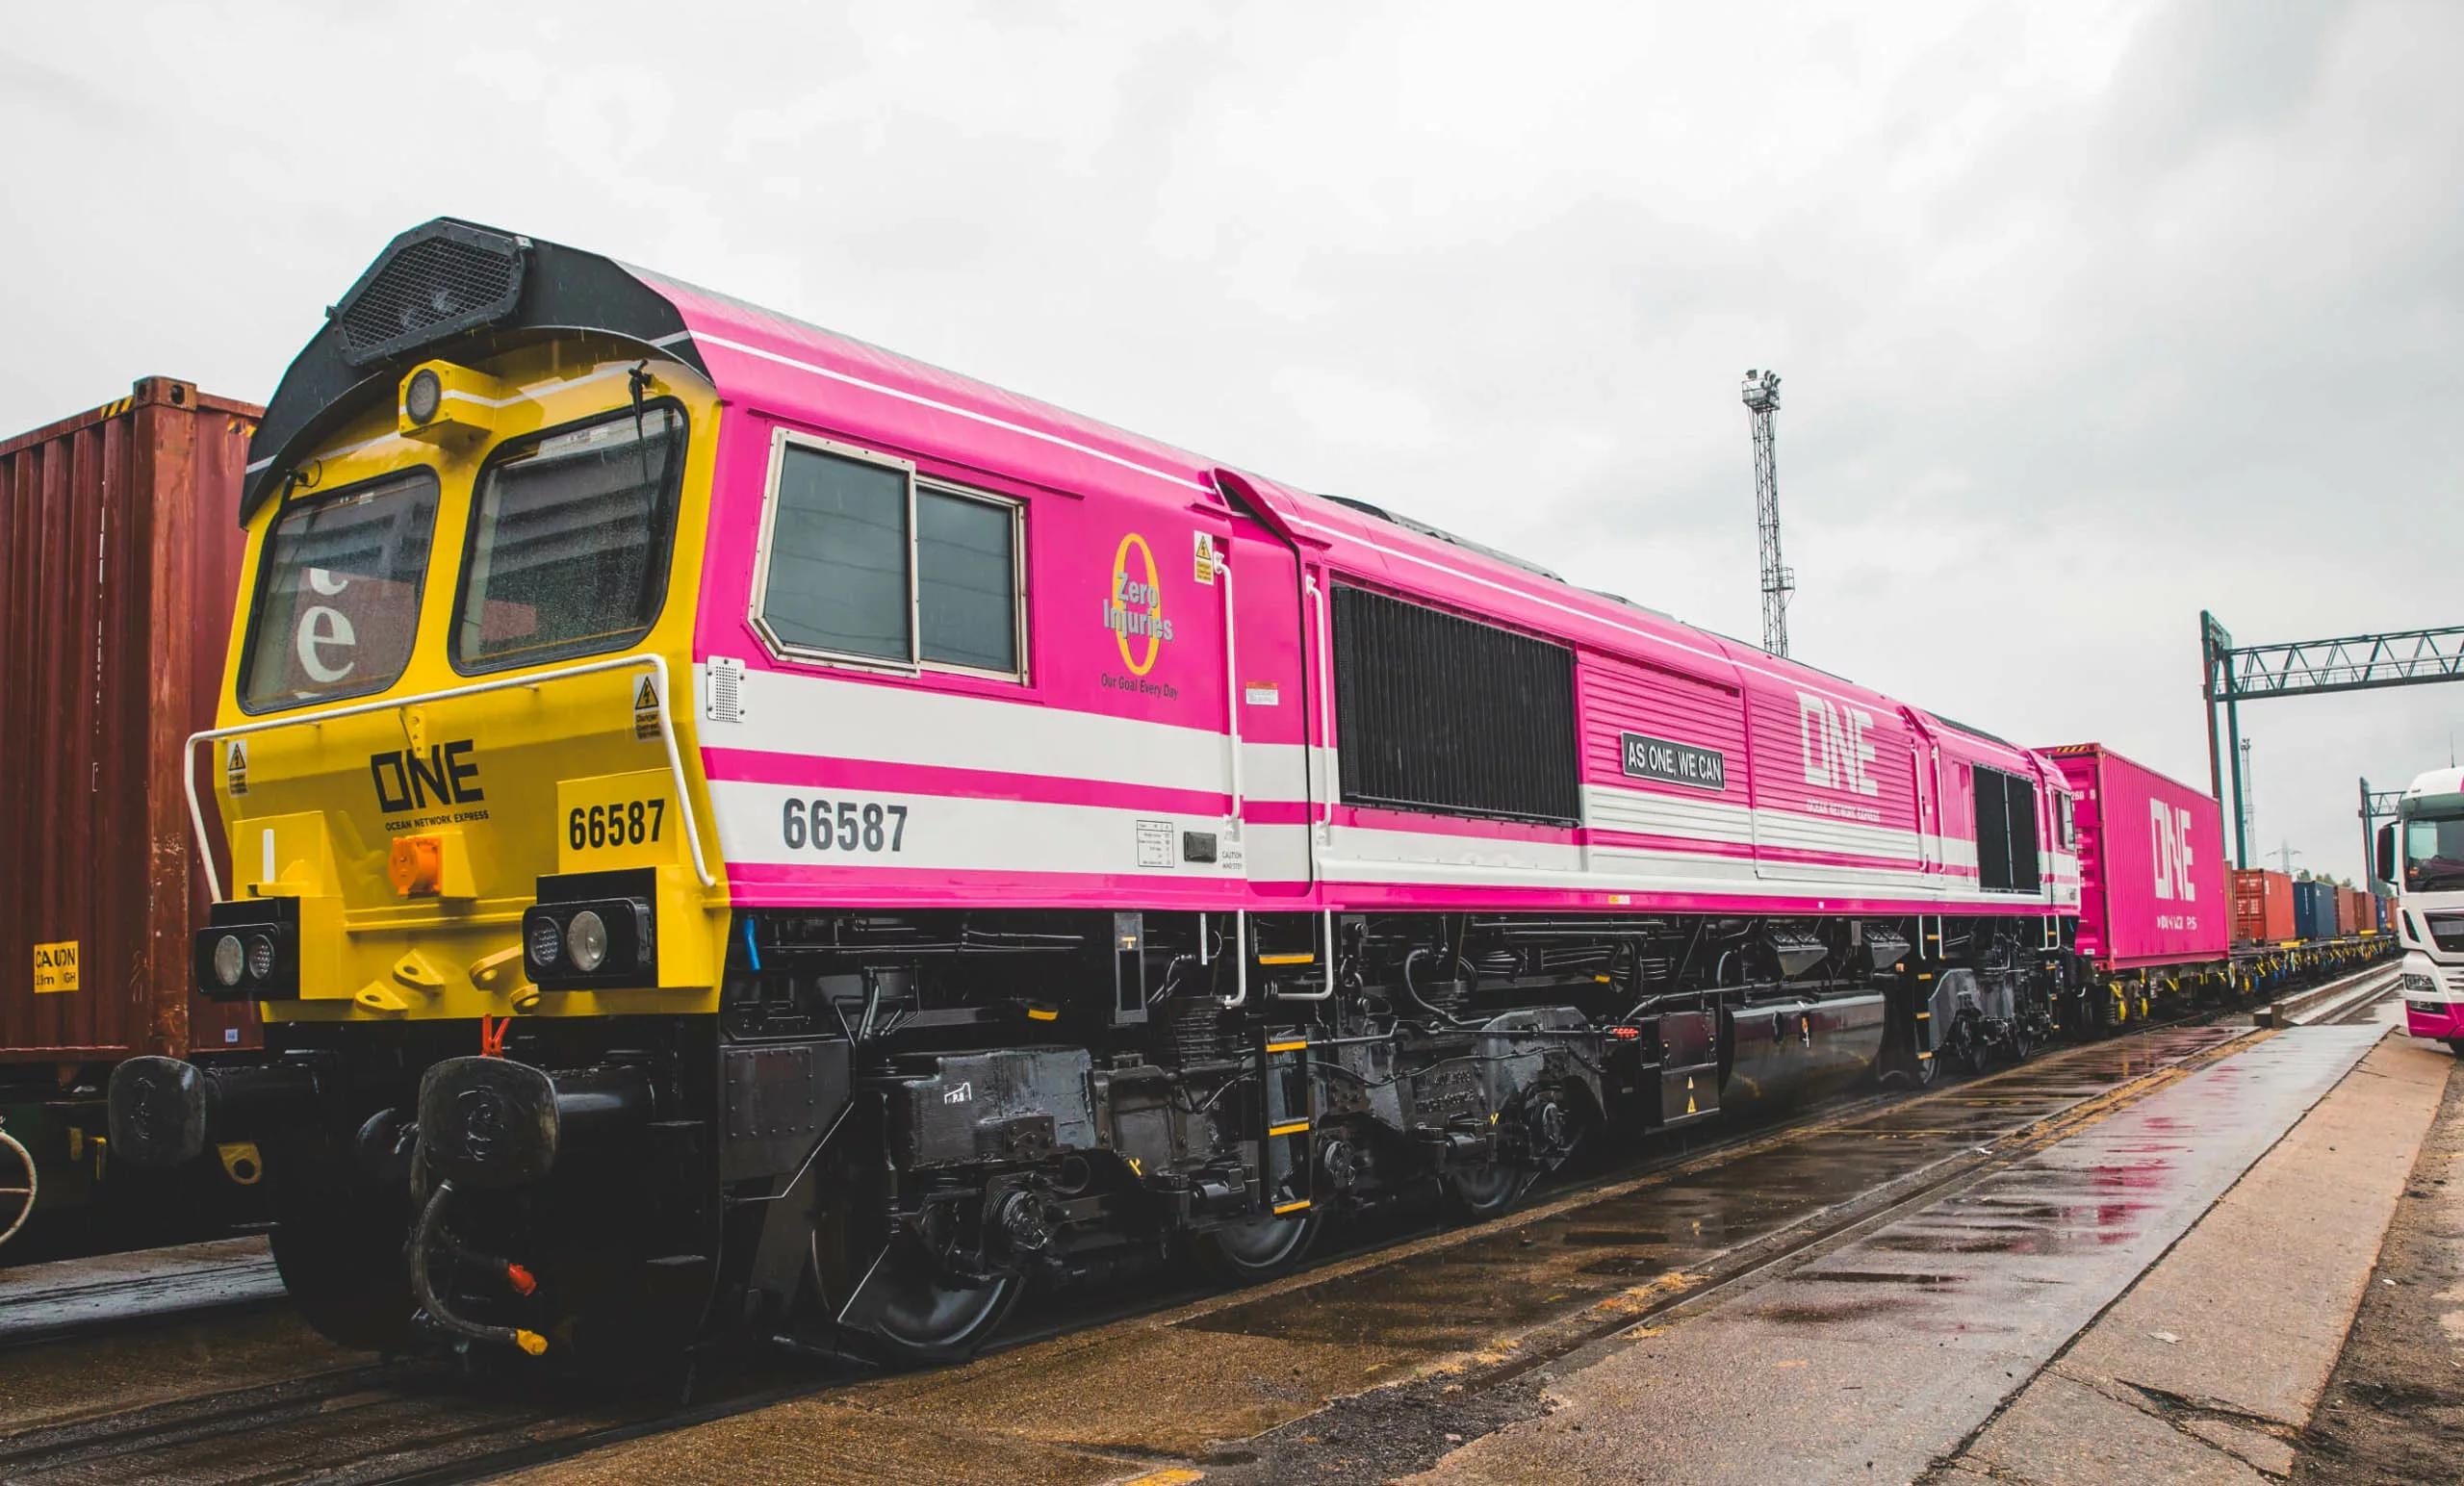 Ocean Network Express (ONE) and Freightliner adopt Hydrotreated Vegetable Oil (HVO) fuel to power rail cargo journeys in UK